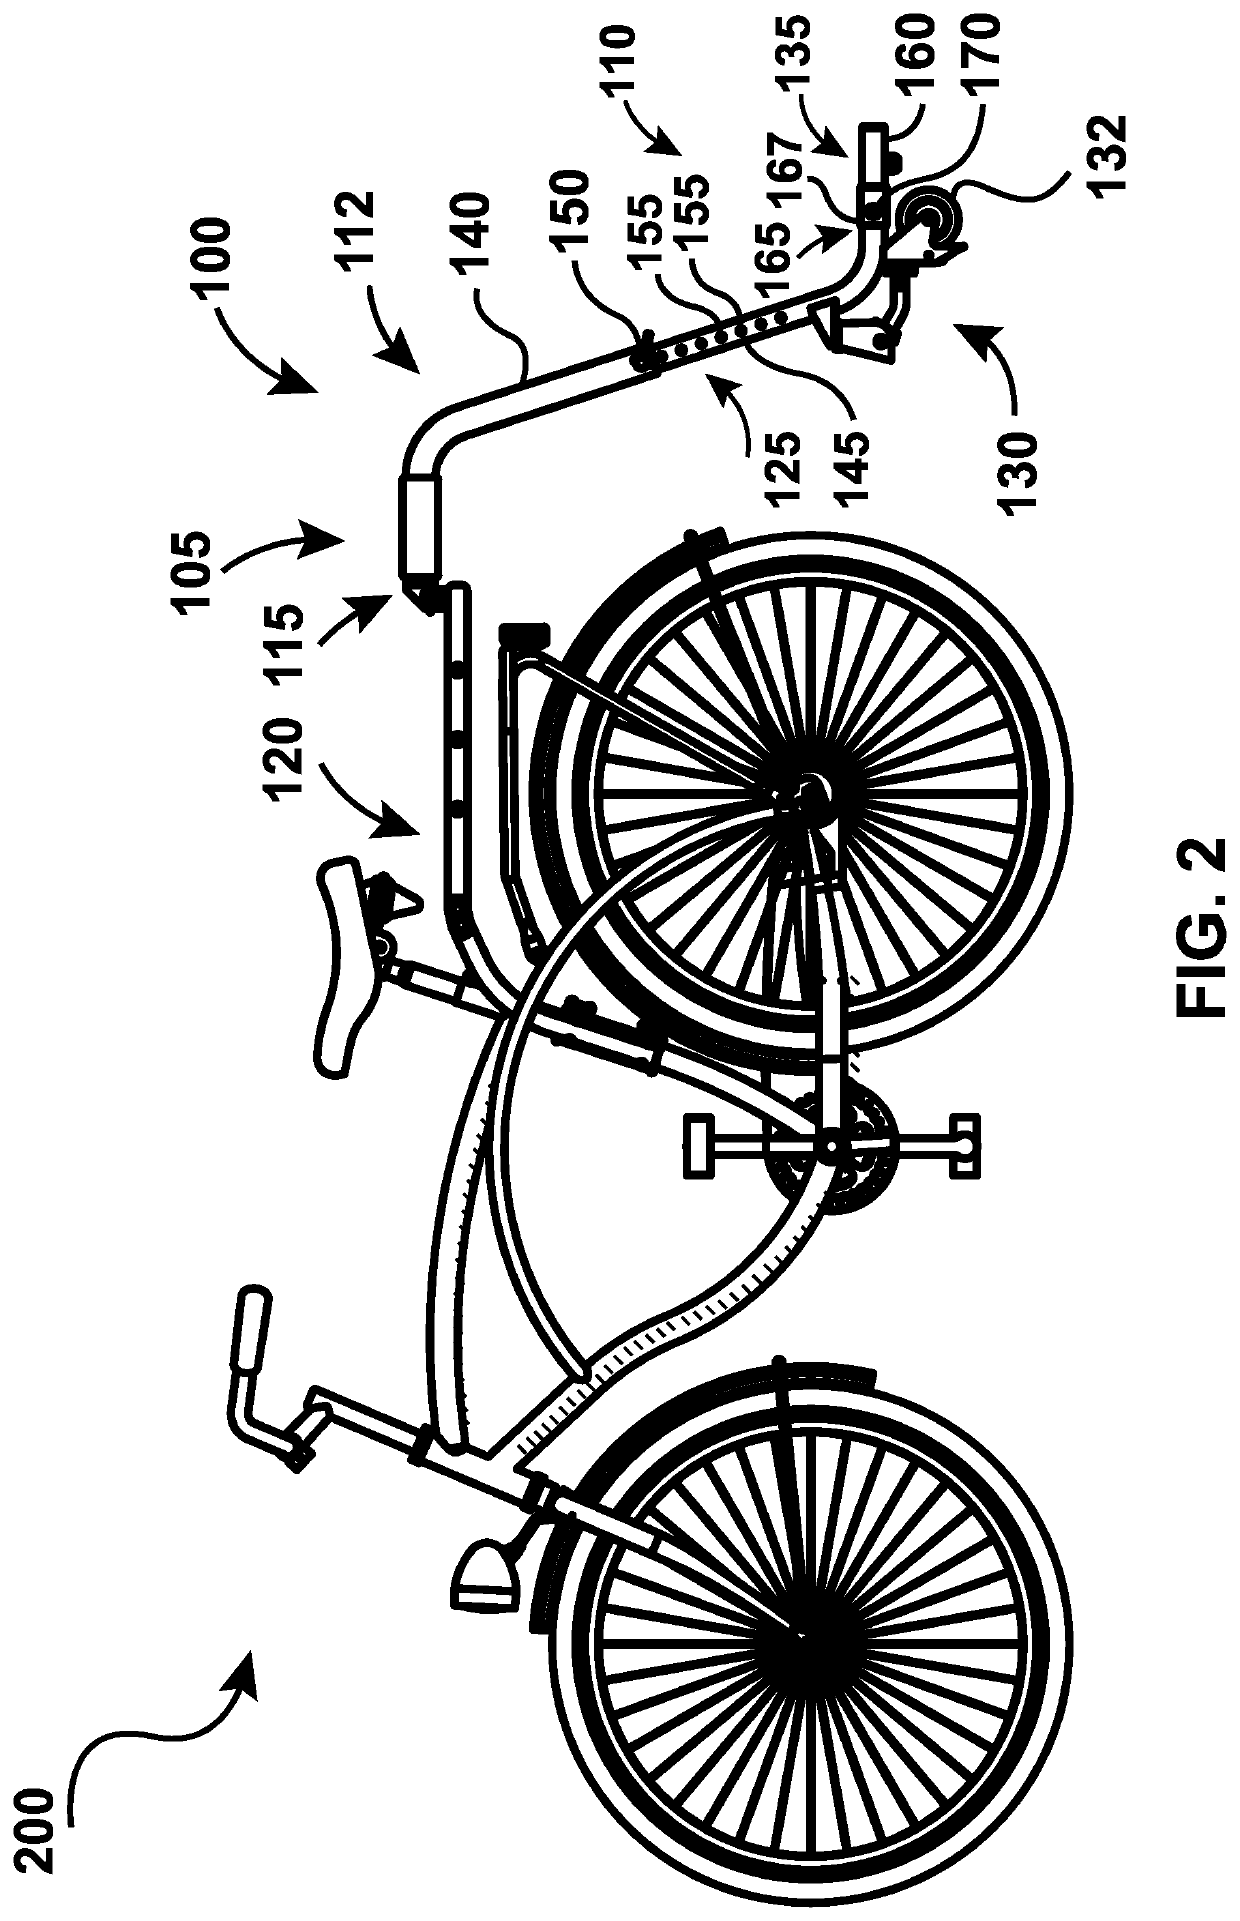 Tow arm assembly to detachably attach a trailer to a bicycle